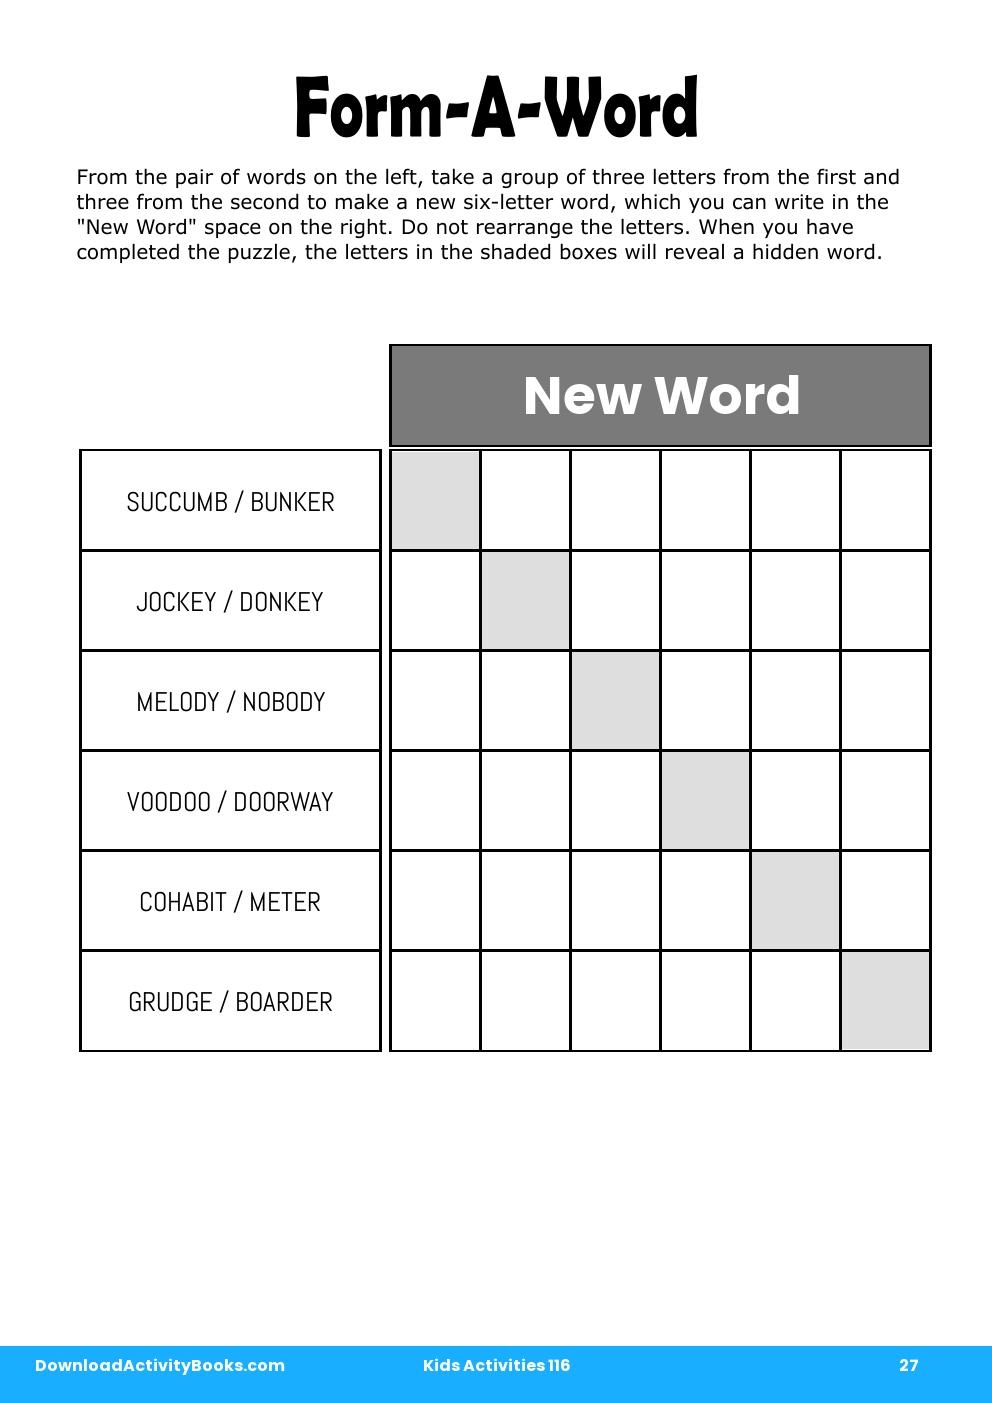 Form-A-Word in Kids Activities 116